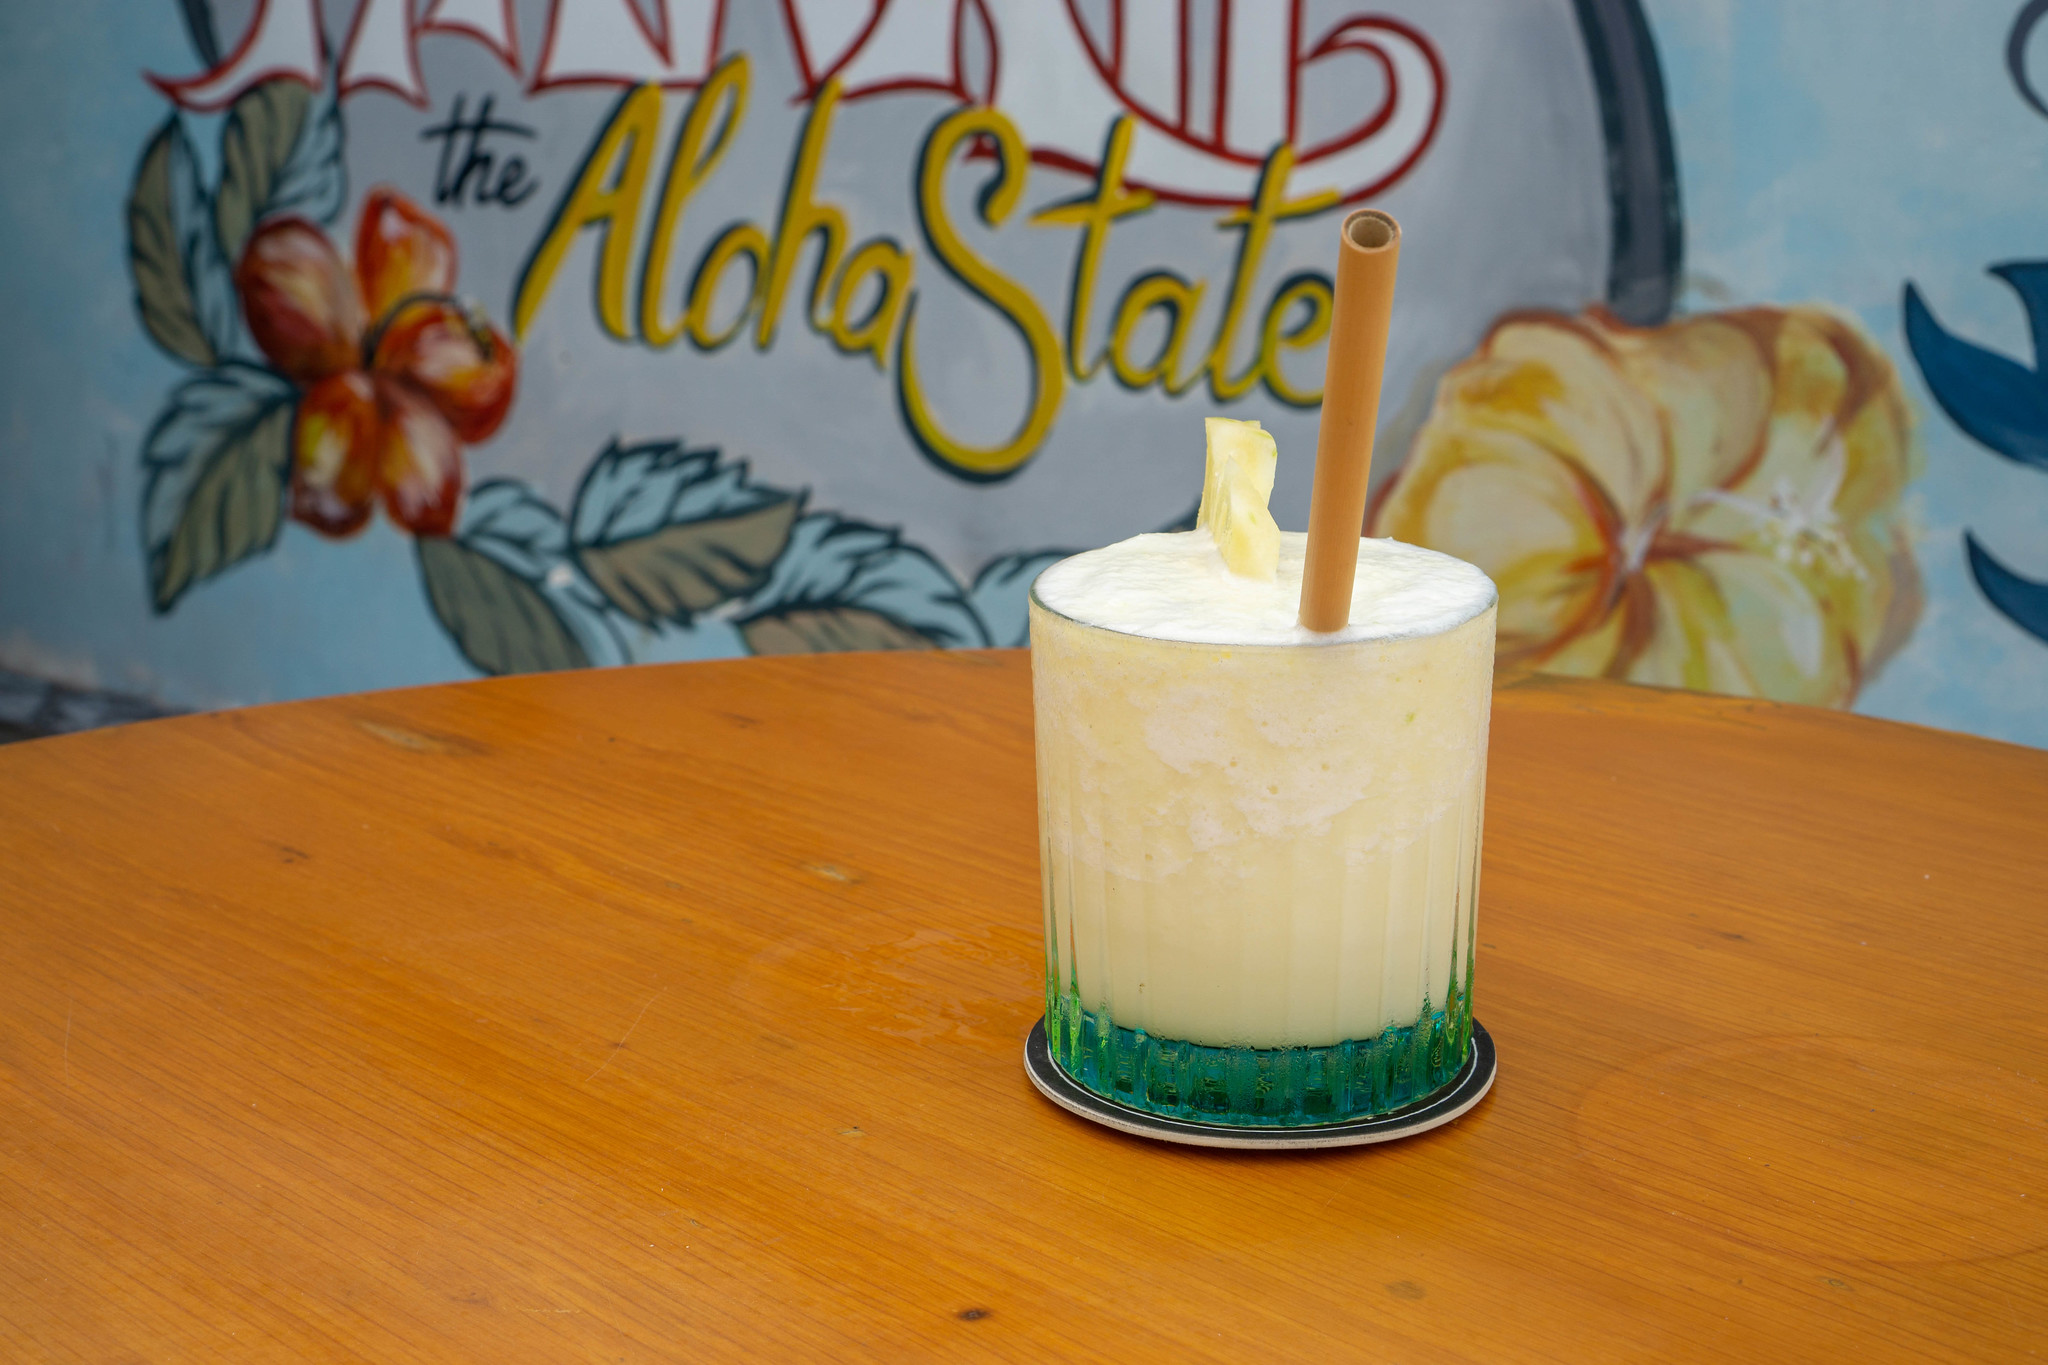 <p>Disney has plenty of secret adult drinks, but what about for the kids? Or for people who don't drink? Well then, go find the Virgin Colada, which is exactly what it sounds like: A Pina Colada minus the alcohol.</p>